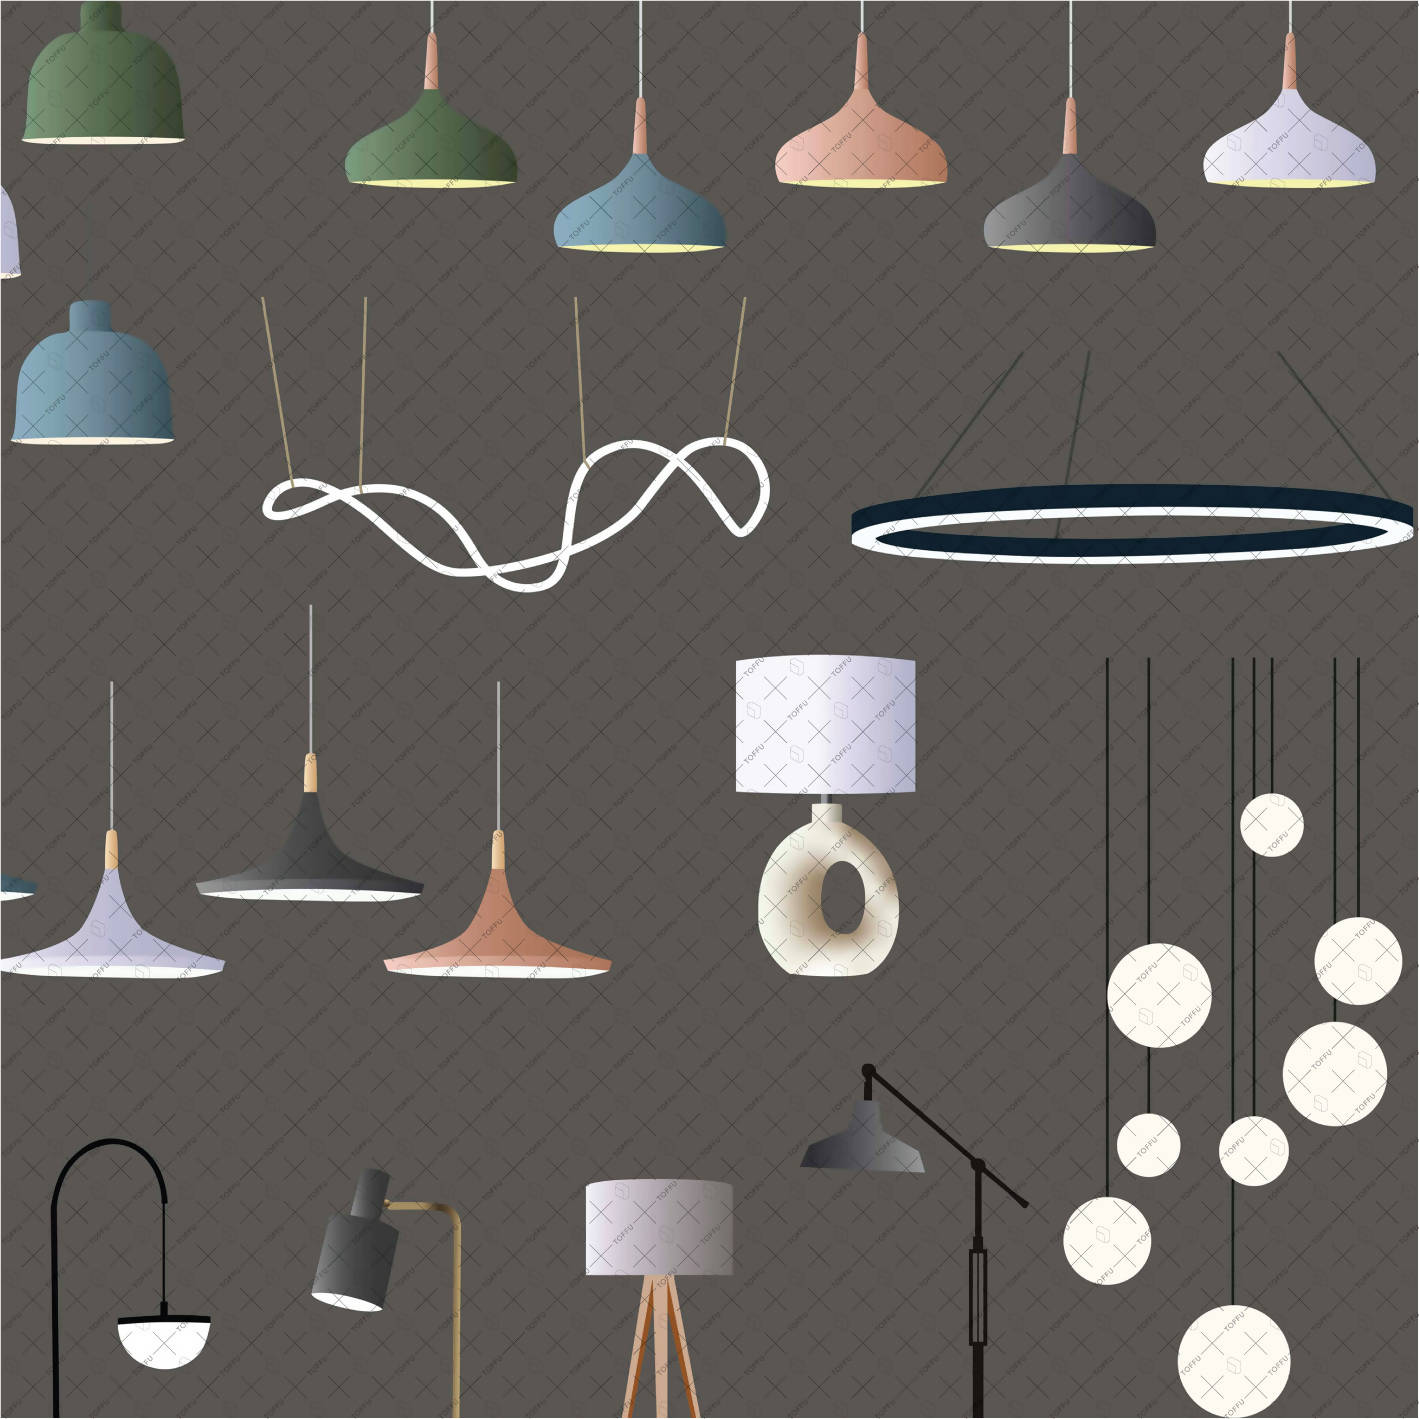 Flat Vector Enlightenment Objects, Lamps and Chandeliers PNG - Toffu Co